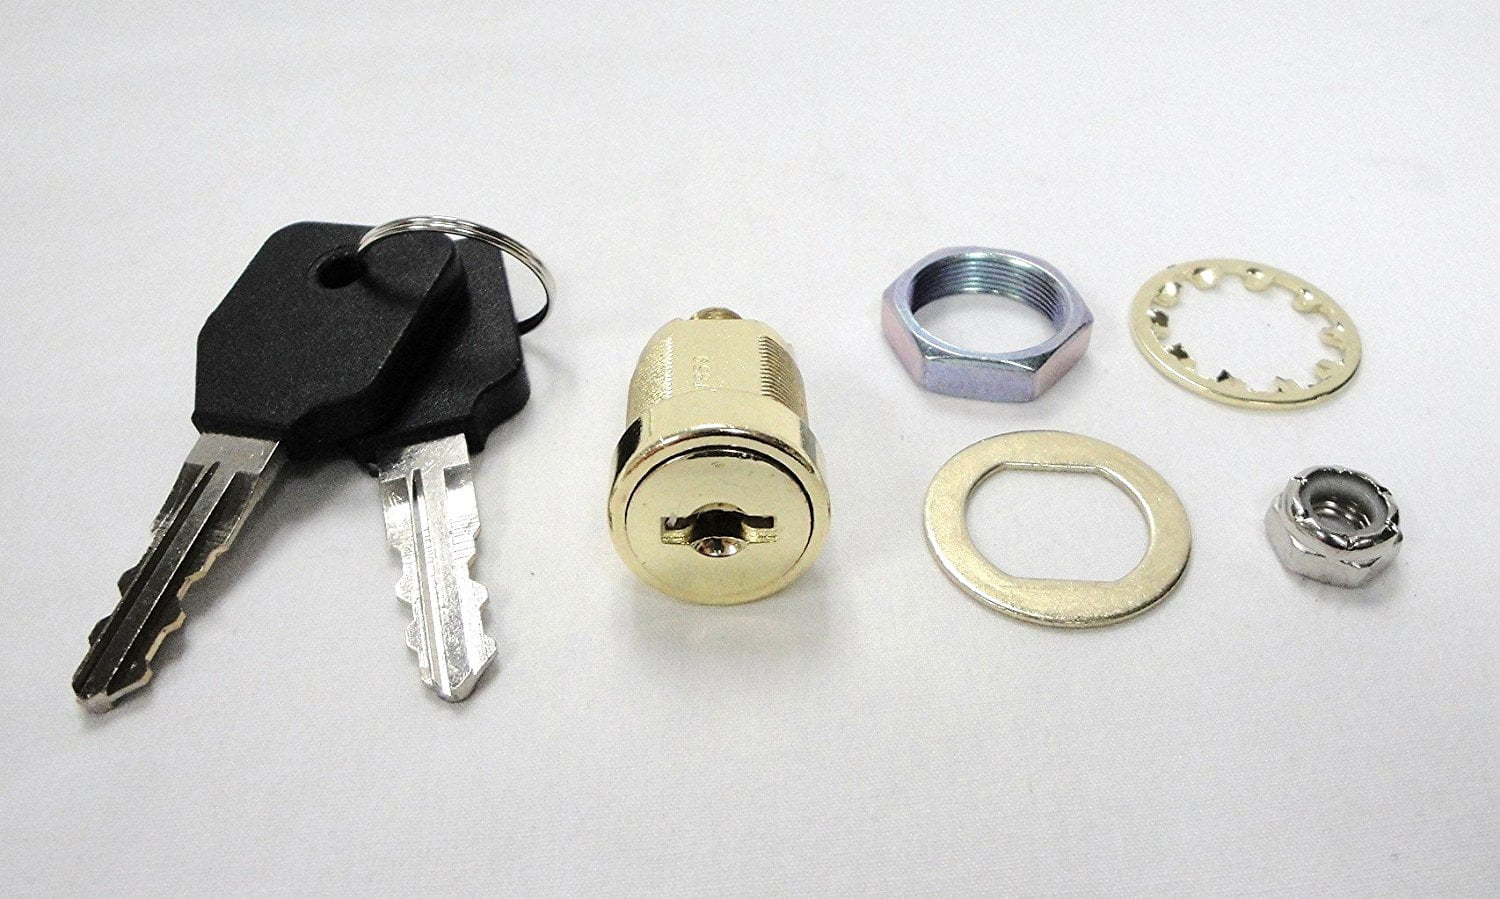 Stack On Replacement Lock Common Replacement Lock By Stackon